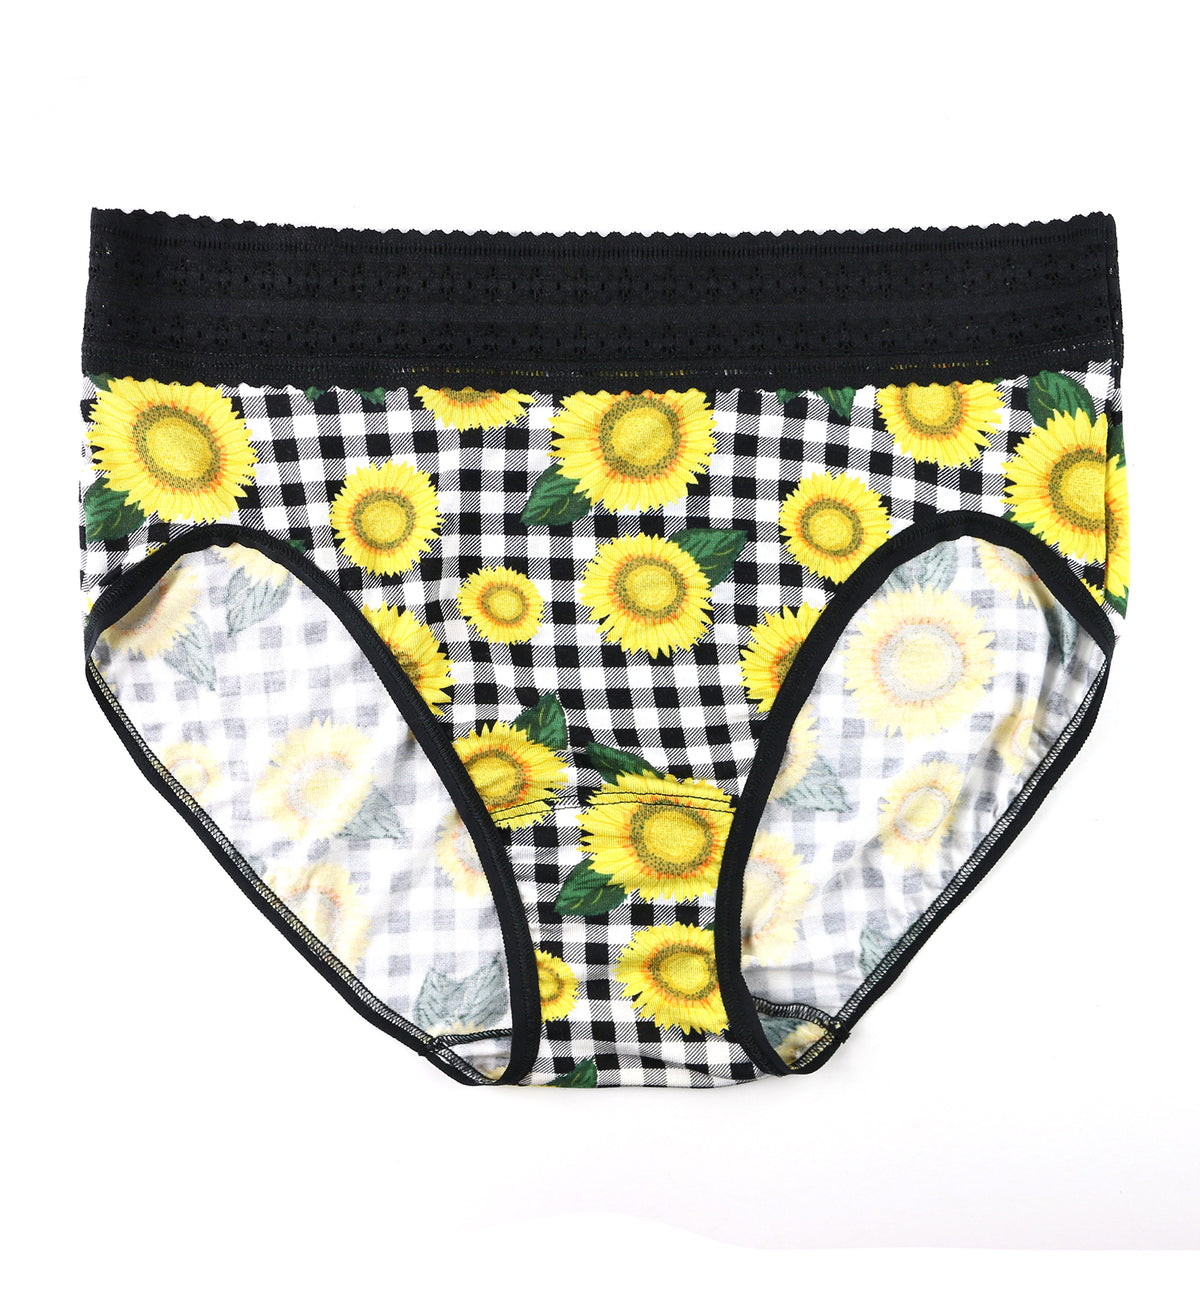 Hanky Panky Dream Printed French Brief (PR682464),Small,Fields of Gold - Fields of Gold,Small